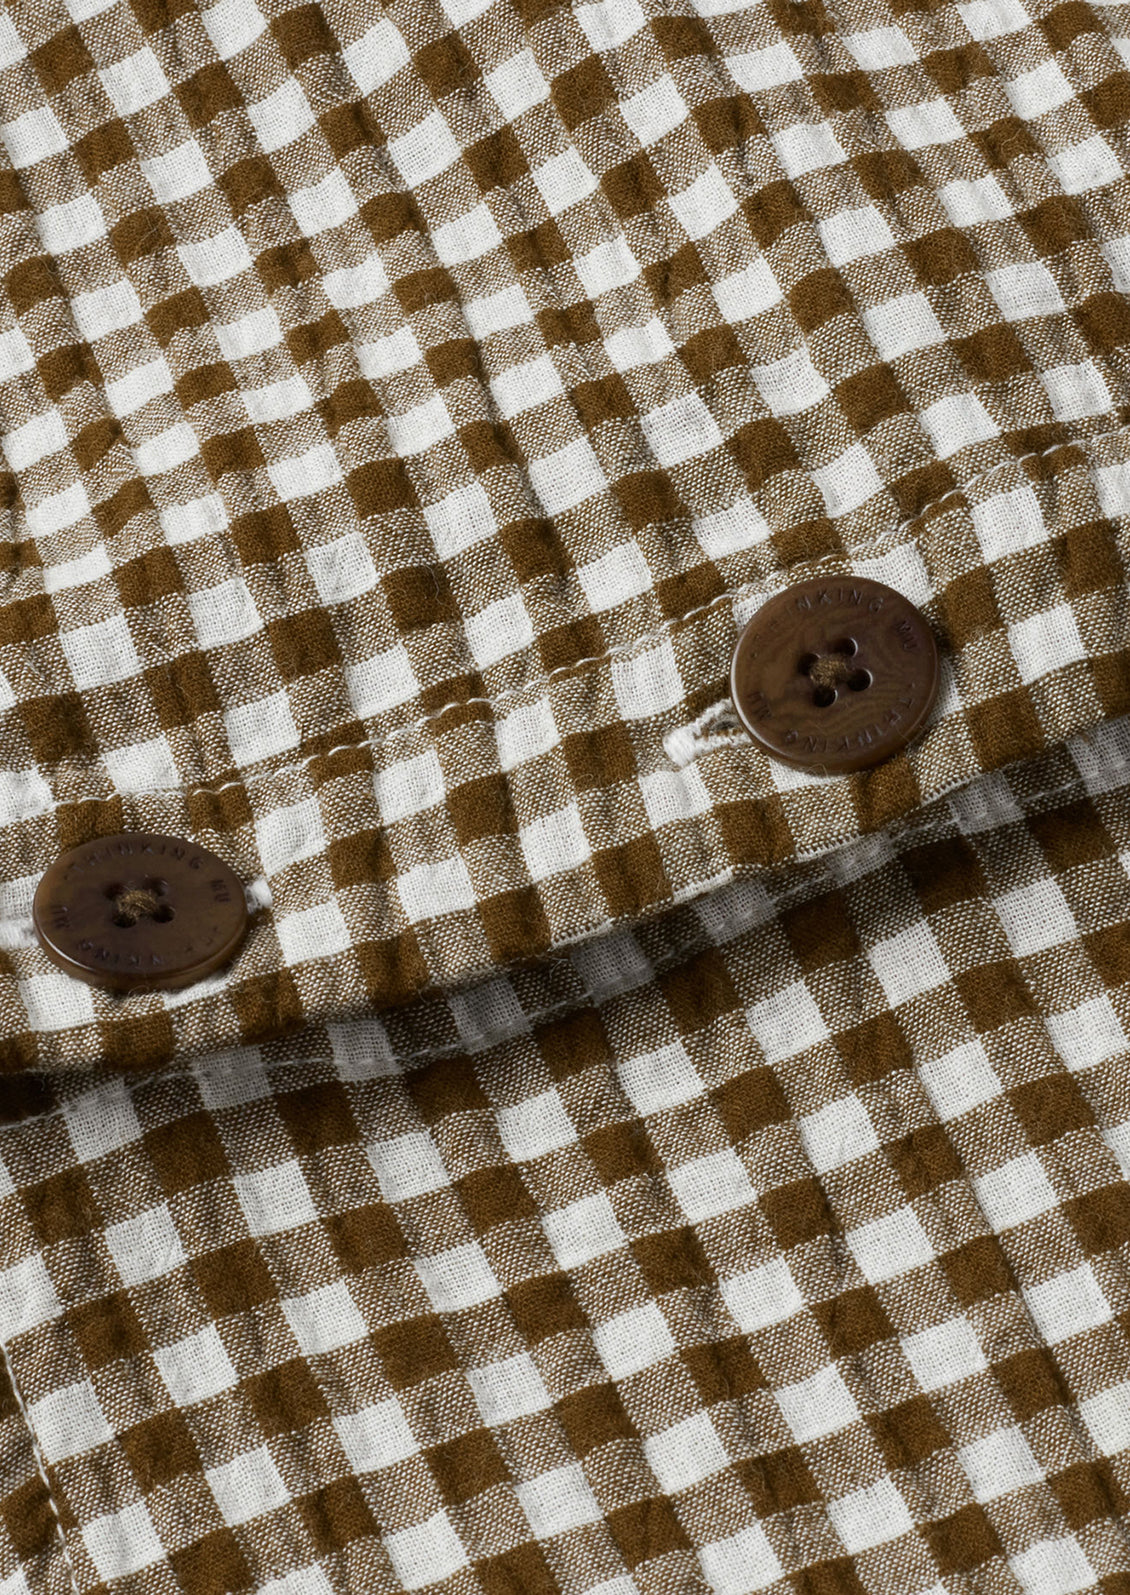 Brown and white textured gingham cotton fabric with brown button detail.